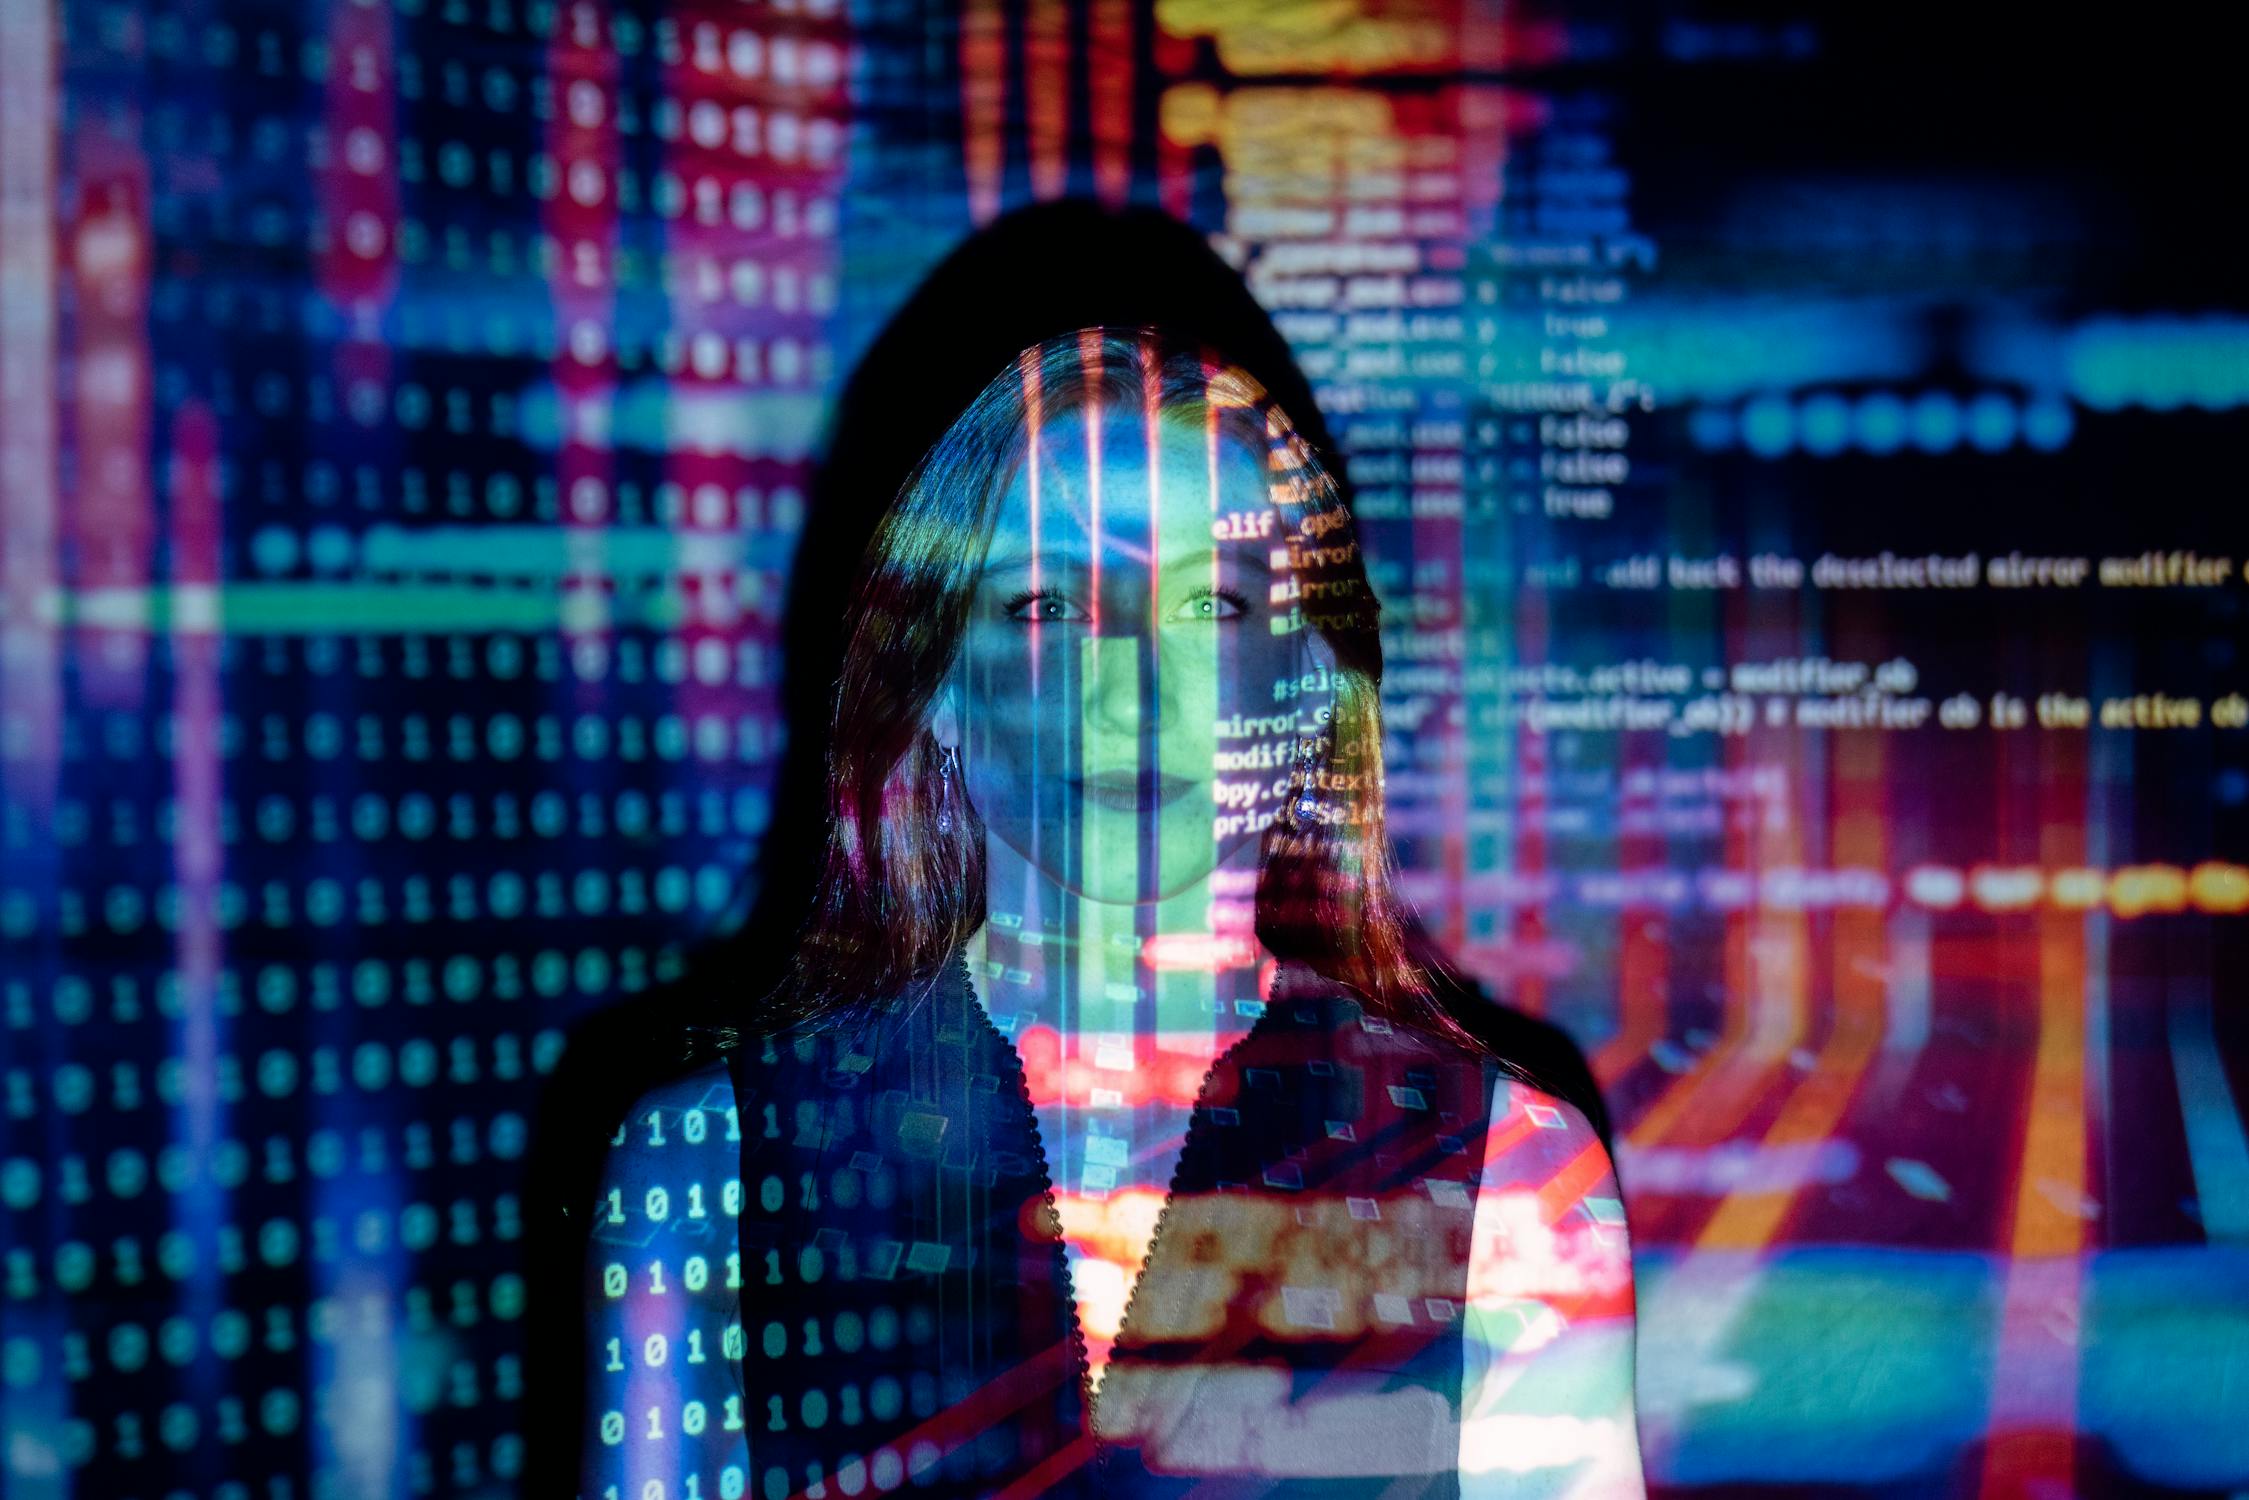 Image of woman overlaid with code and computer hardware images in different colors. 